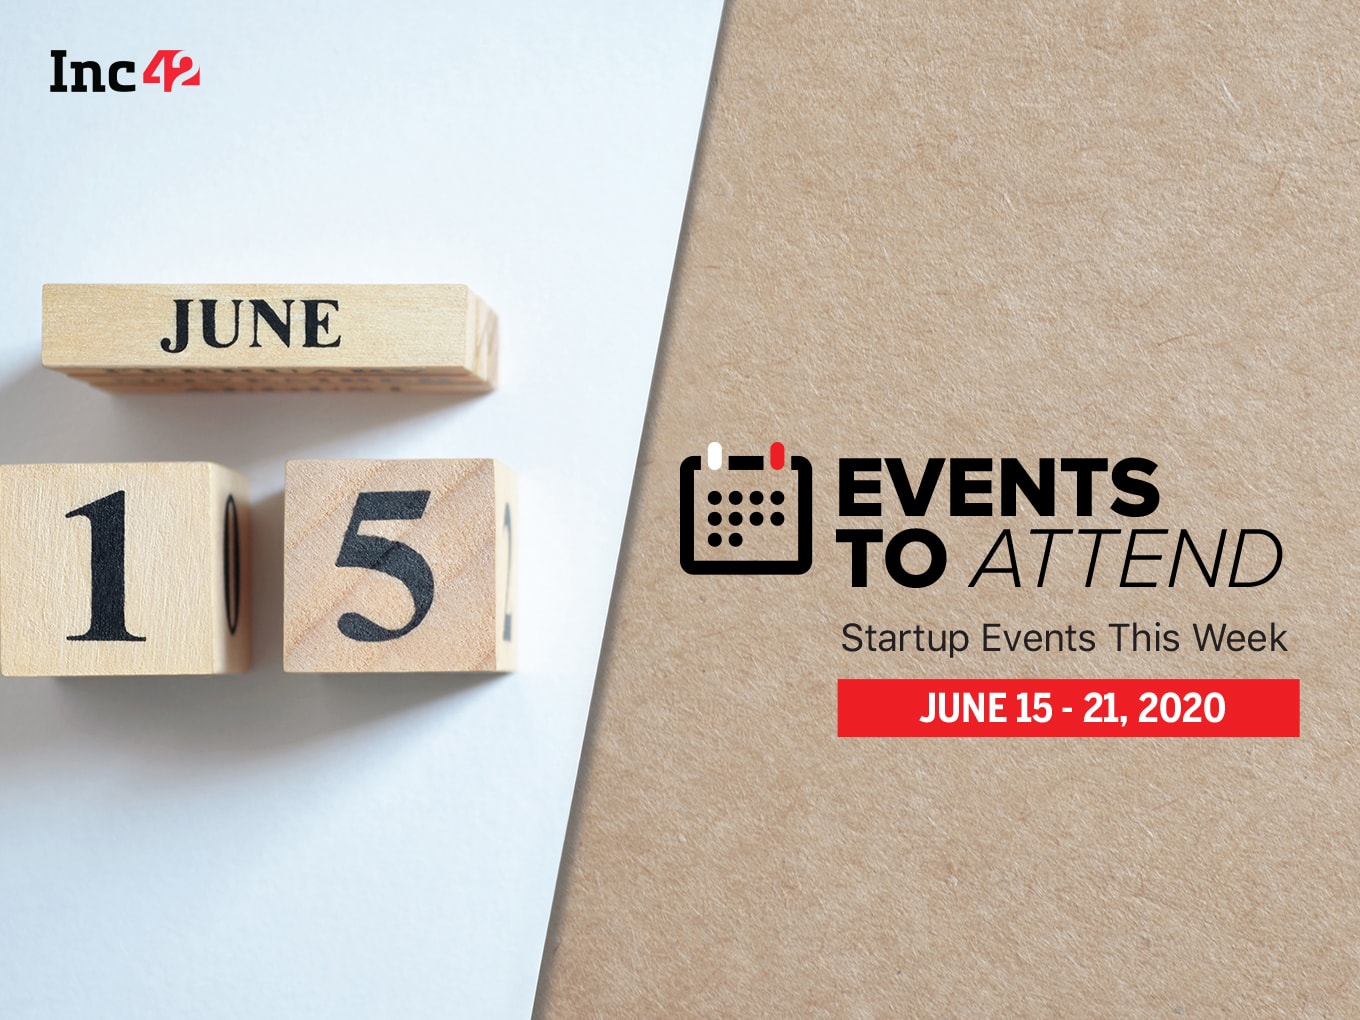 Startup Events This Week: Inc42 Hosts Wingify Paras Gupta, And More